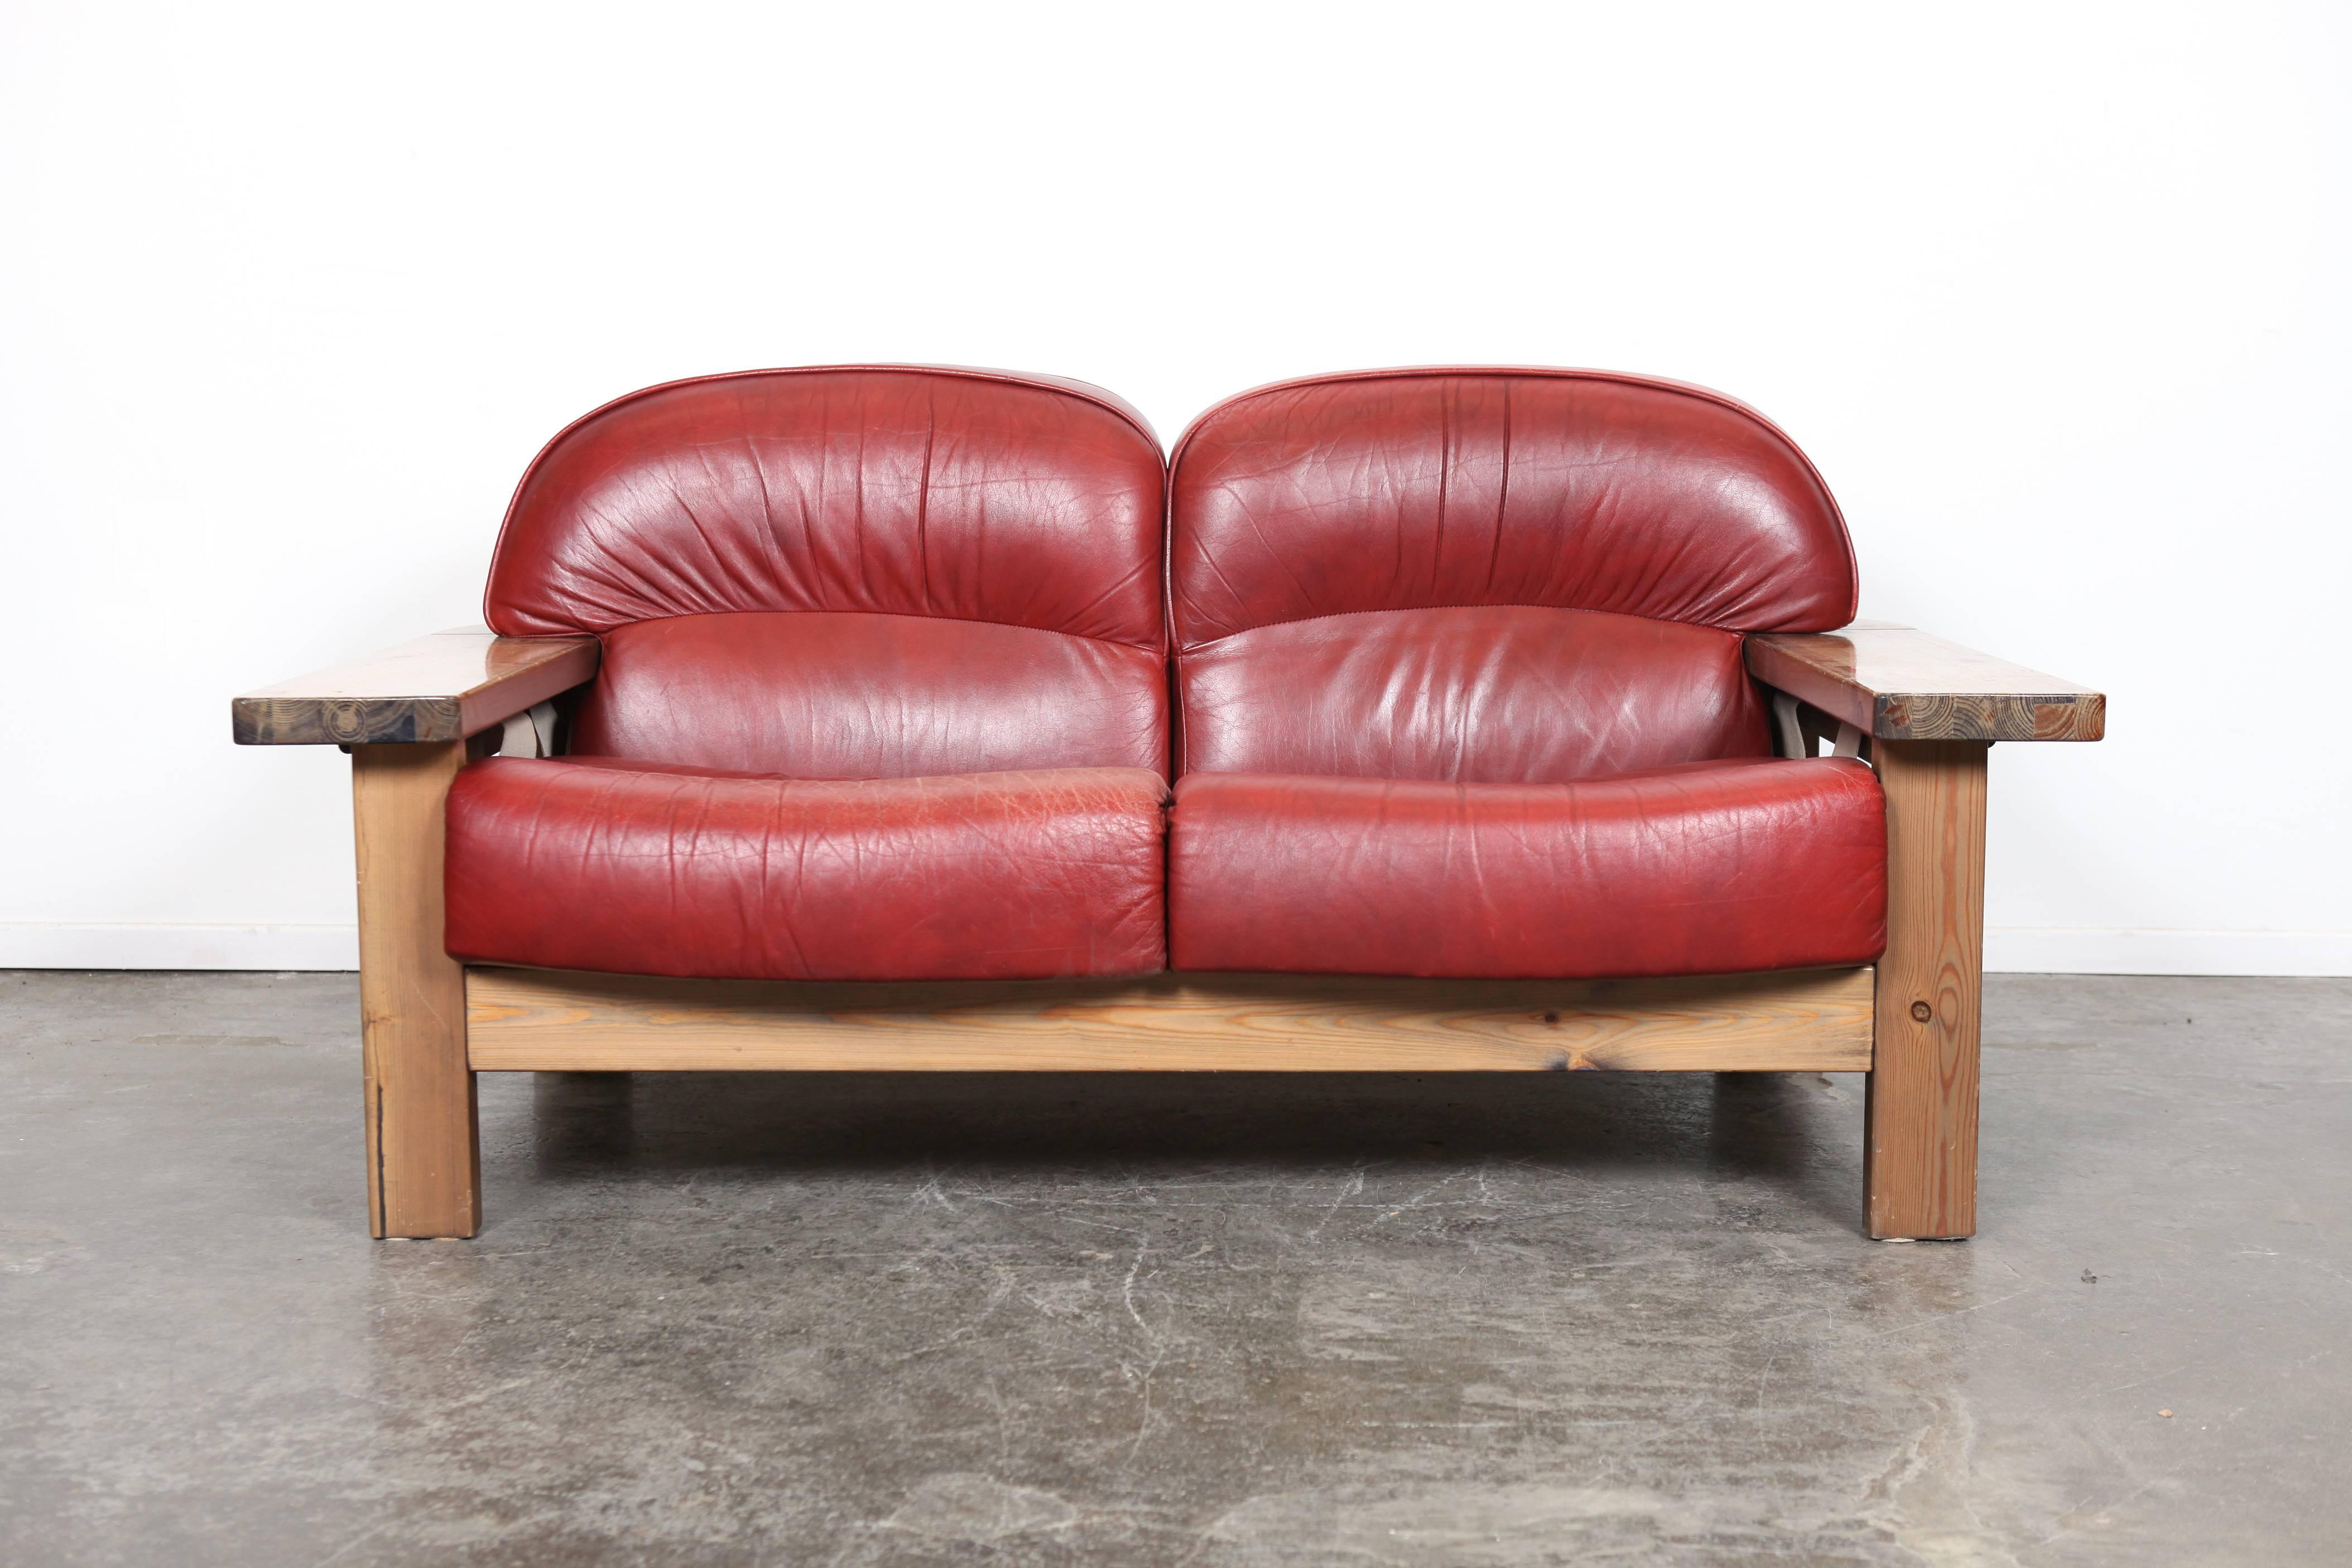 Mid-Century Modern very unique solid pine two-seat sofa with original curved red leather cushions, designed by Hämeen Kalustaja,  Finland, 1970's. Matching three seat sofa available for purchase separately.